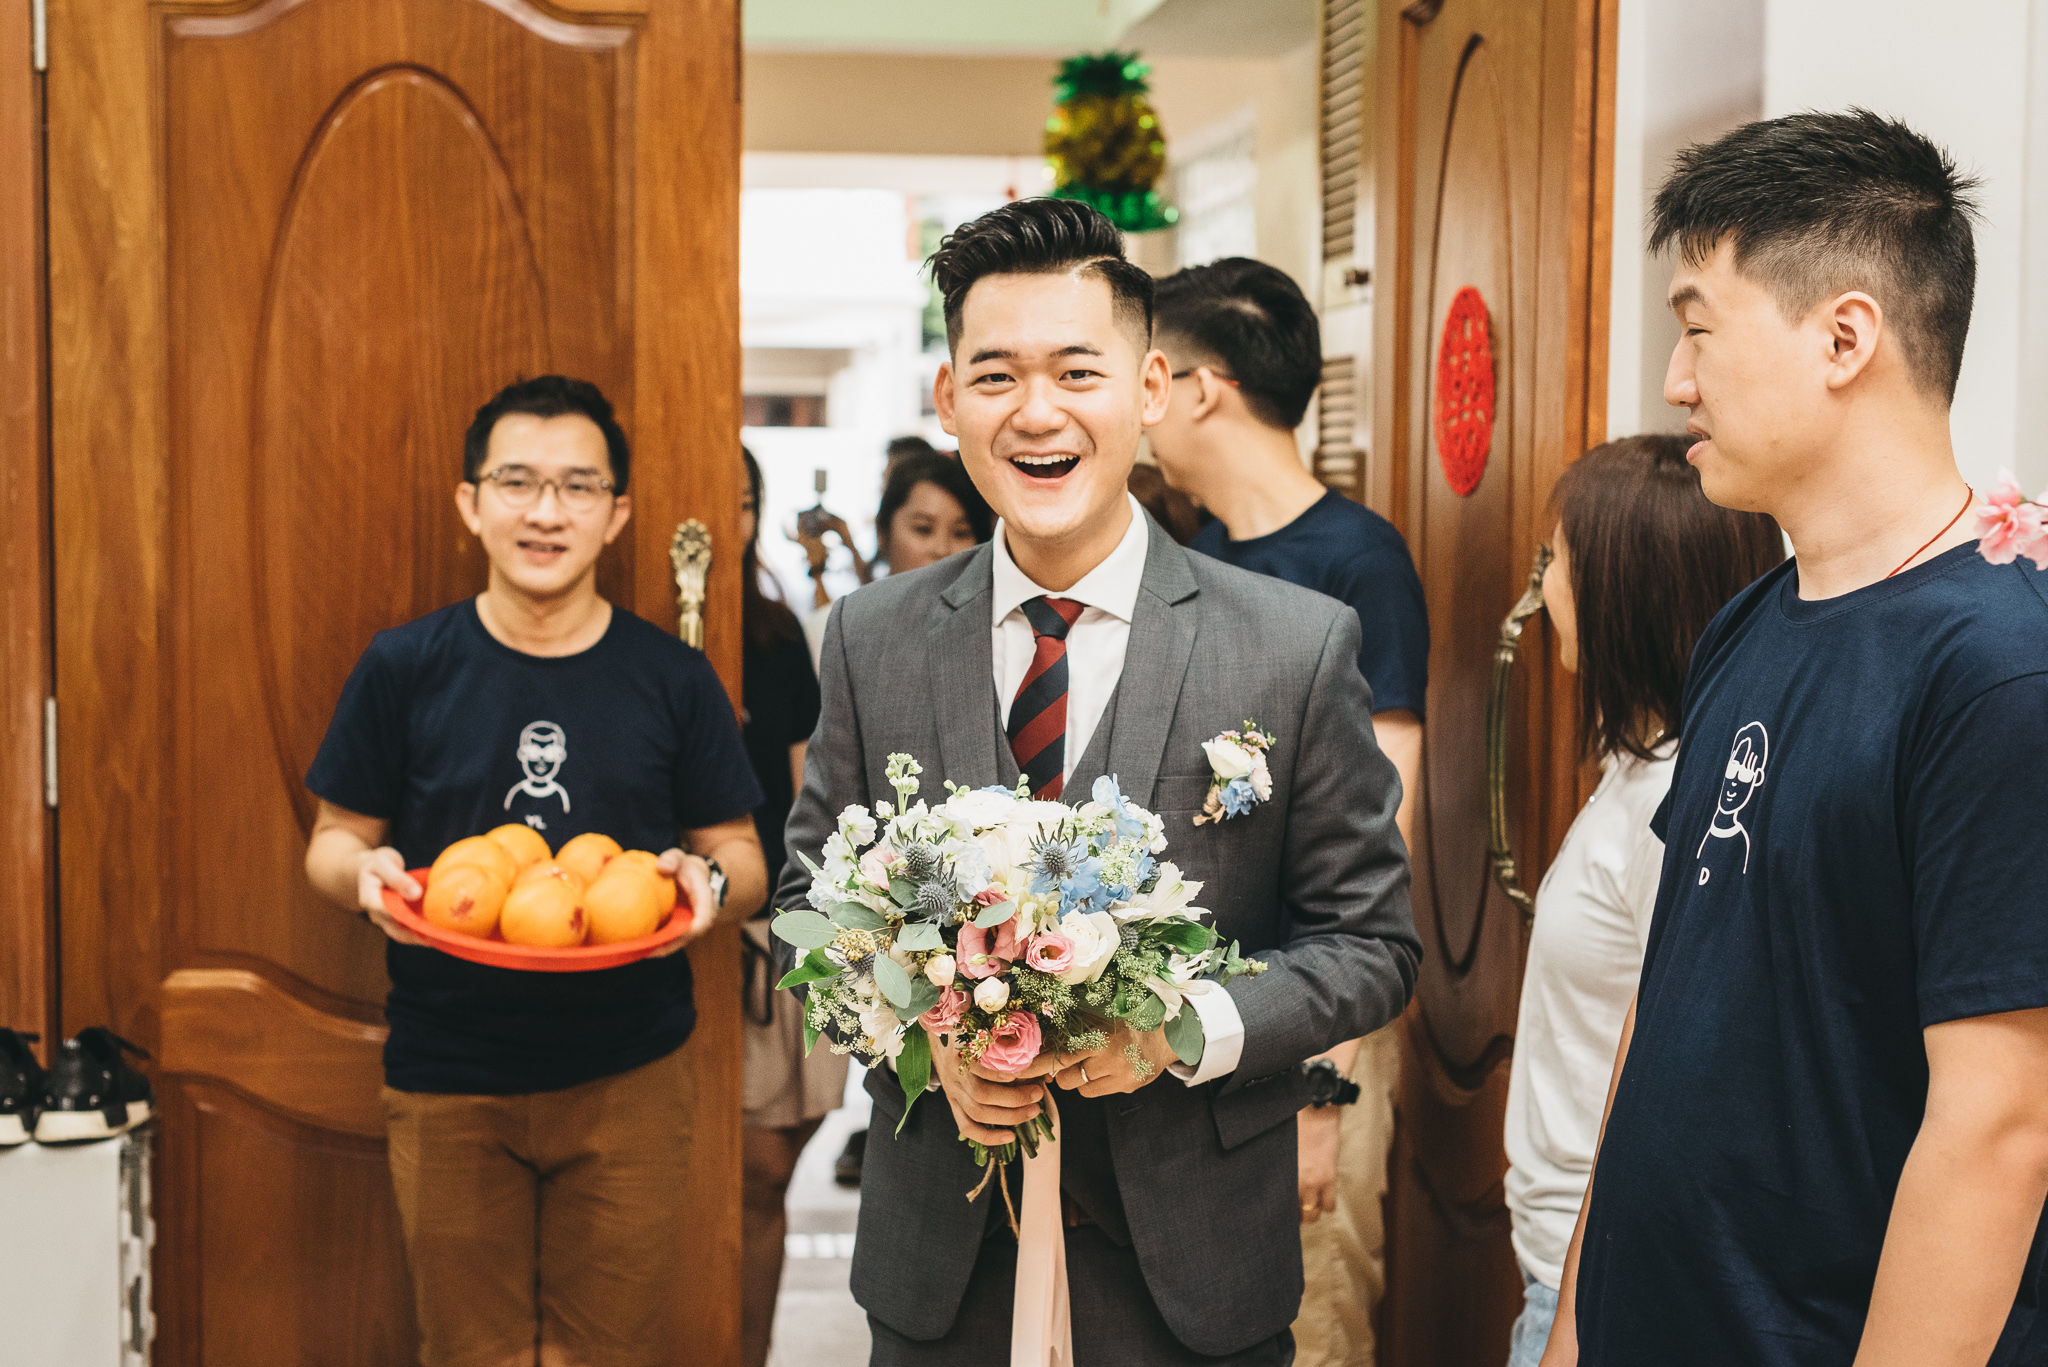 Alice & Wei Bang Wedding Day Highlights (resized for sharing) - 033.jpg